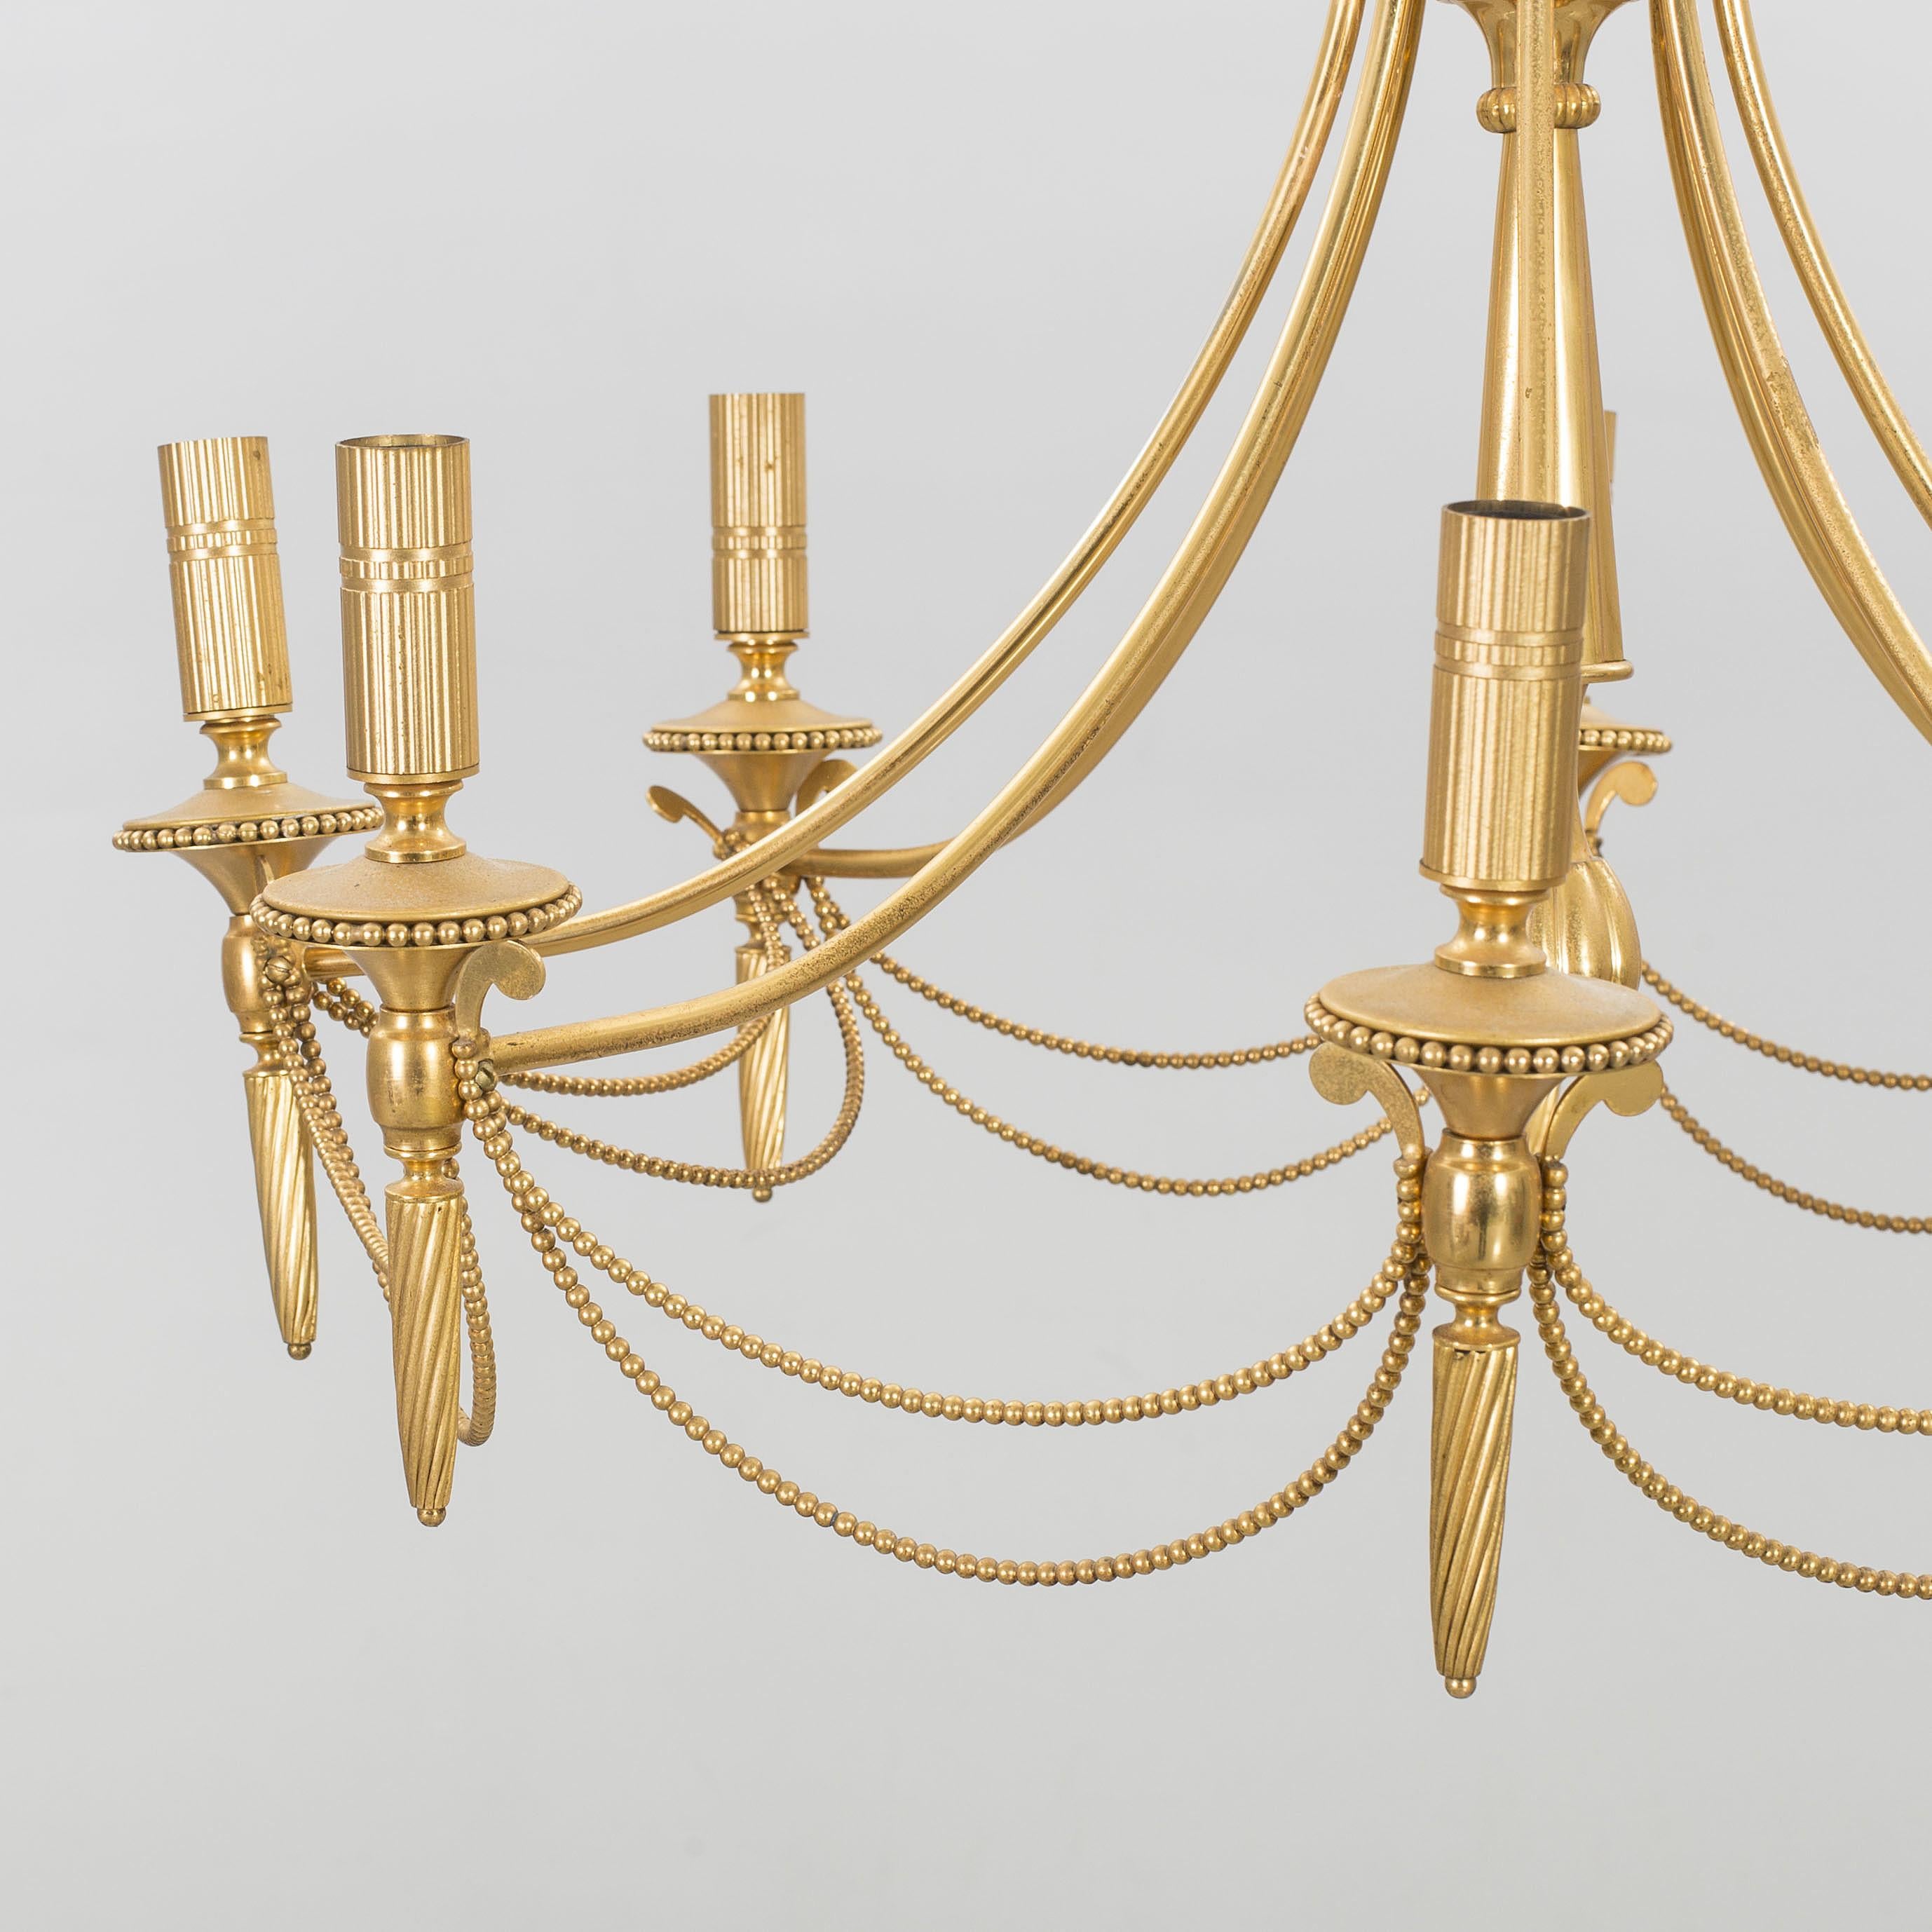 Beautiful patina. Italian brass chandelier by Gaetano Sciolari, from the early second half of the 20th century. Unusual and elegant. Great for transitional spaces.